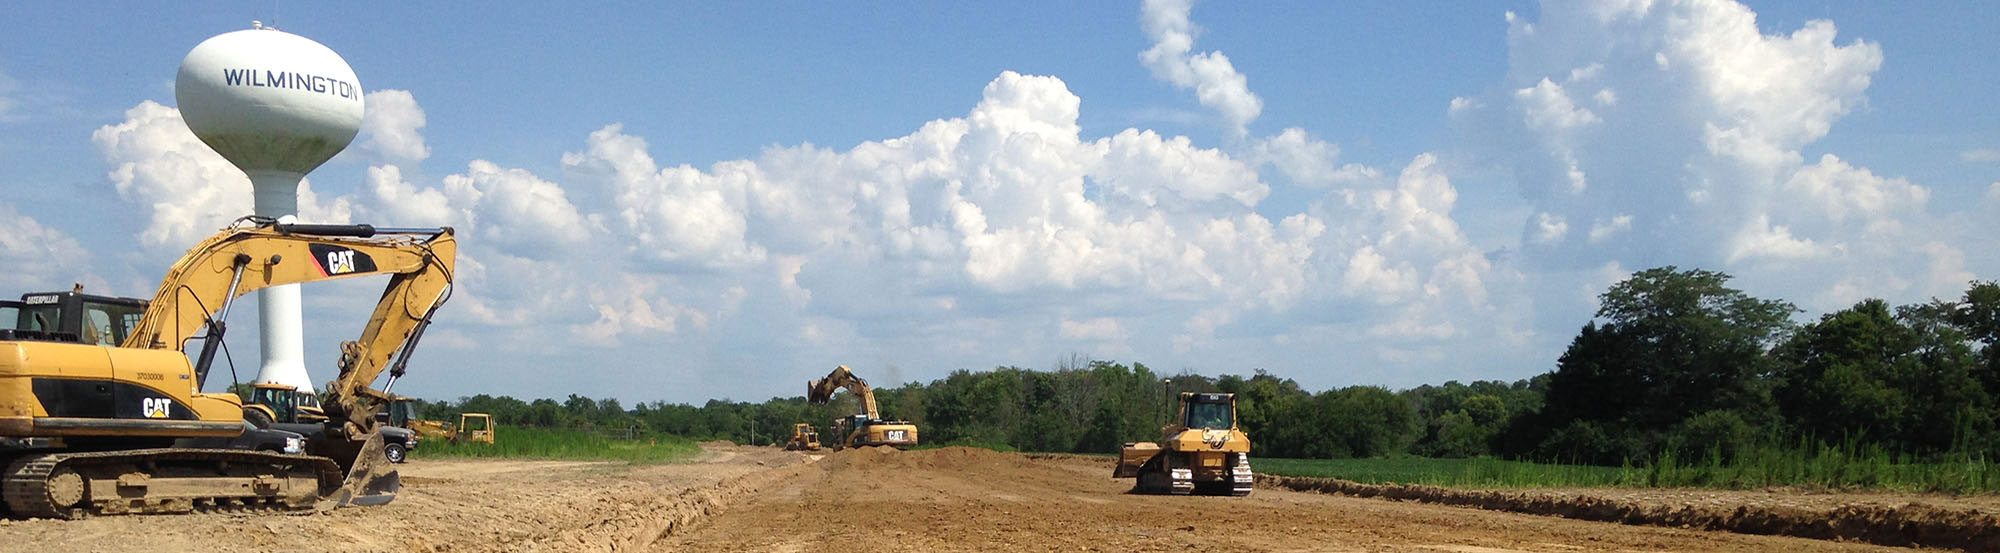 Airborne Connector project in Wilmington Ohio